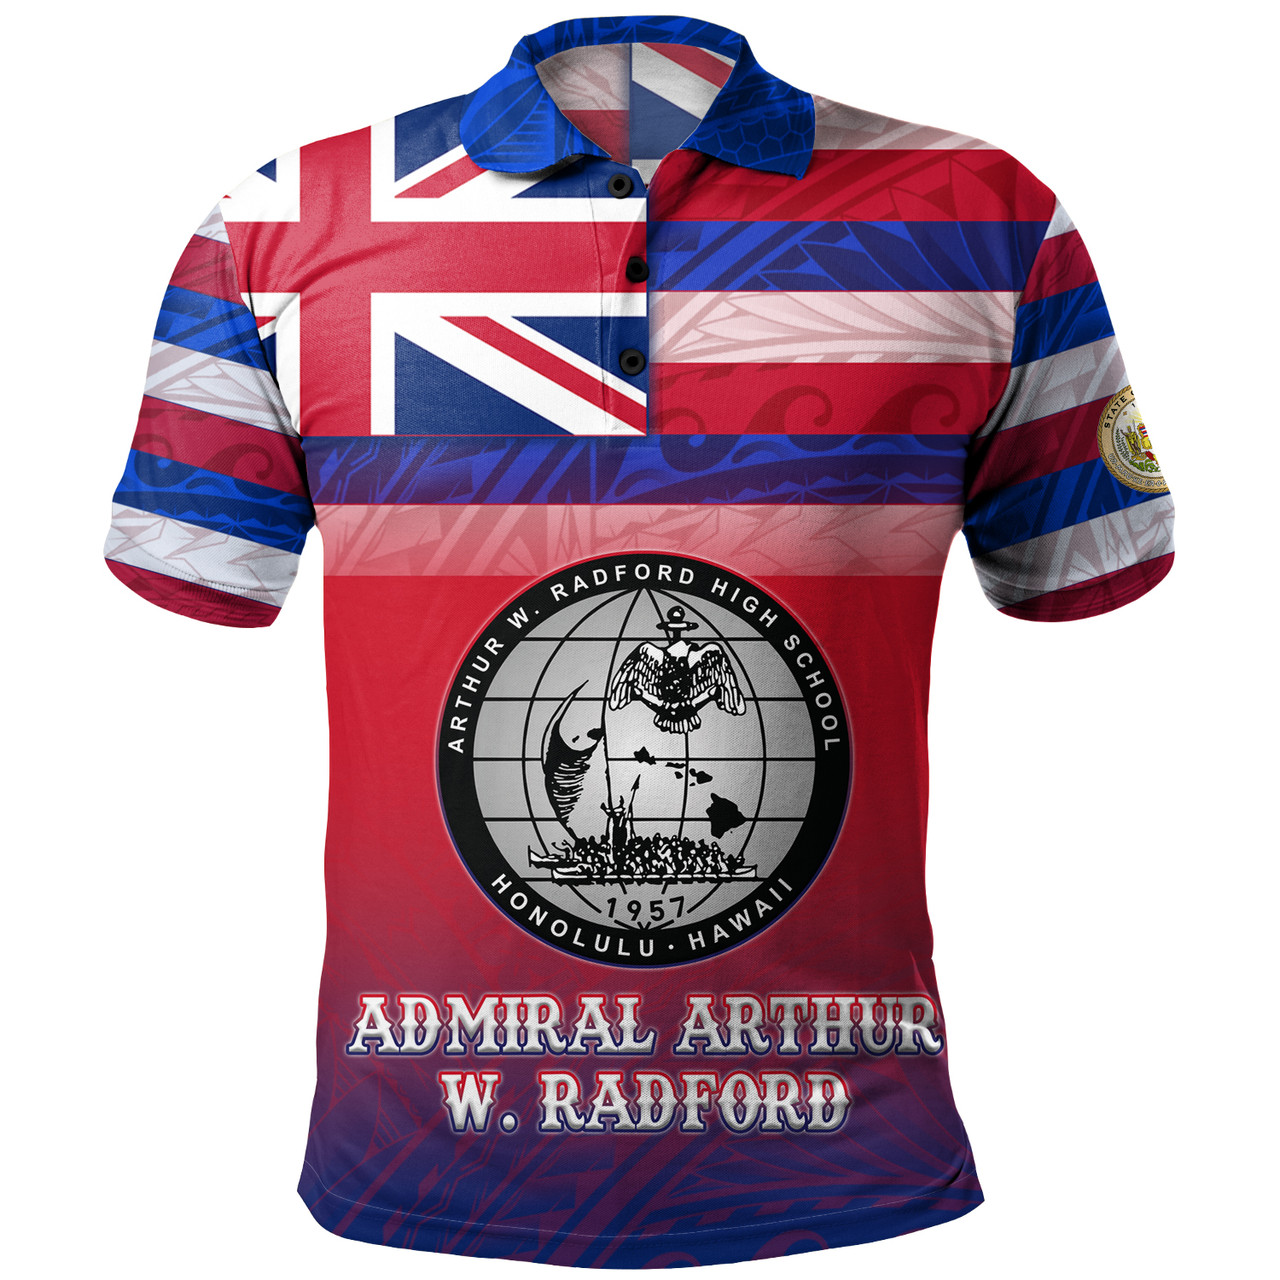 Hawaii Admiral Arthur W. Radford High School Polo Shirt Flag Color With Traditional Patterns